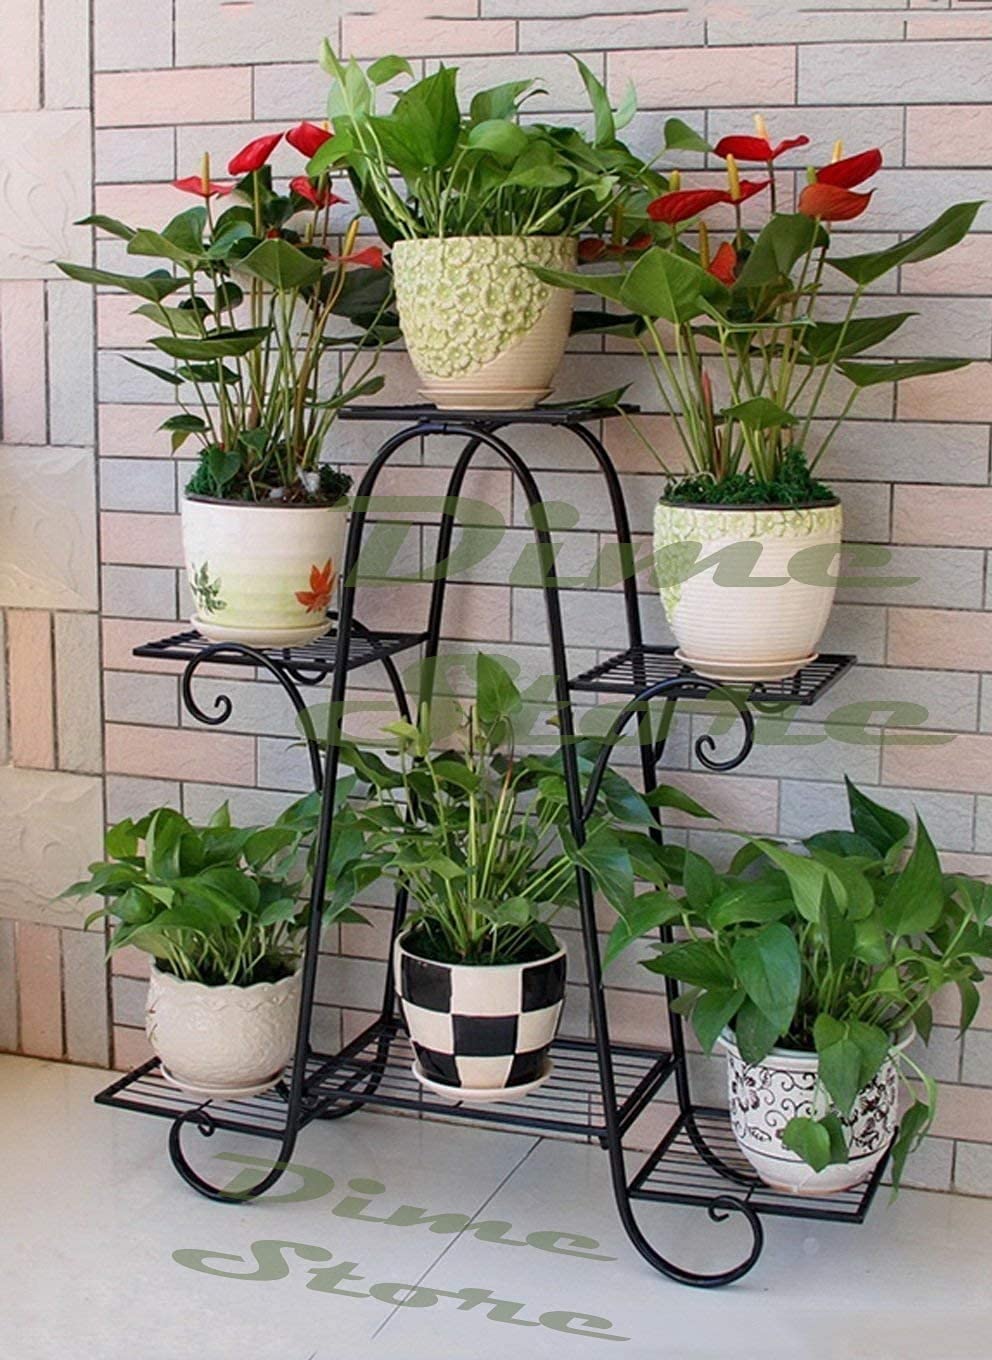 Multi 6 Tier Plant Stand Flower Pot Stand for Balcony Living Room Outdoor Indoor Plants Plant Holder Home Décor Item Dime Store